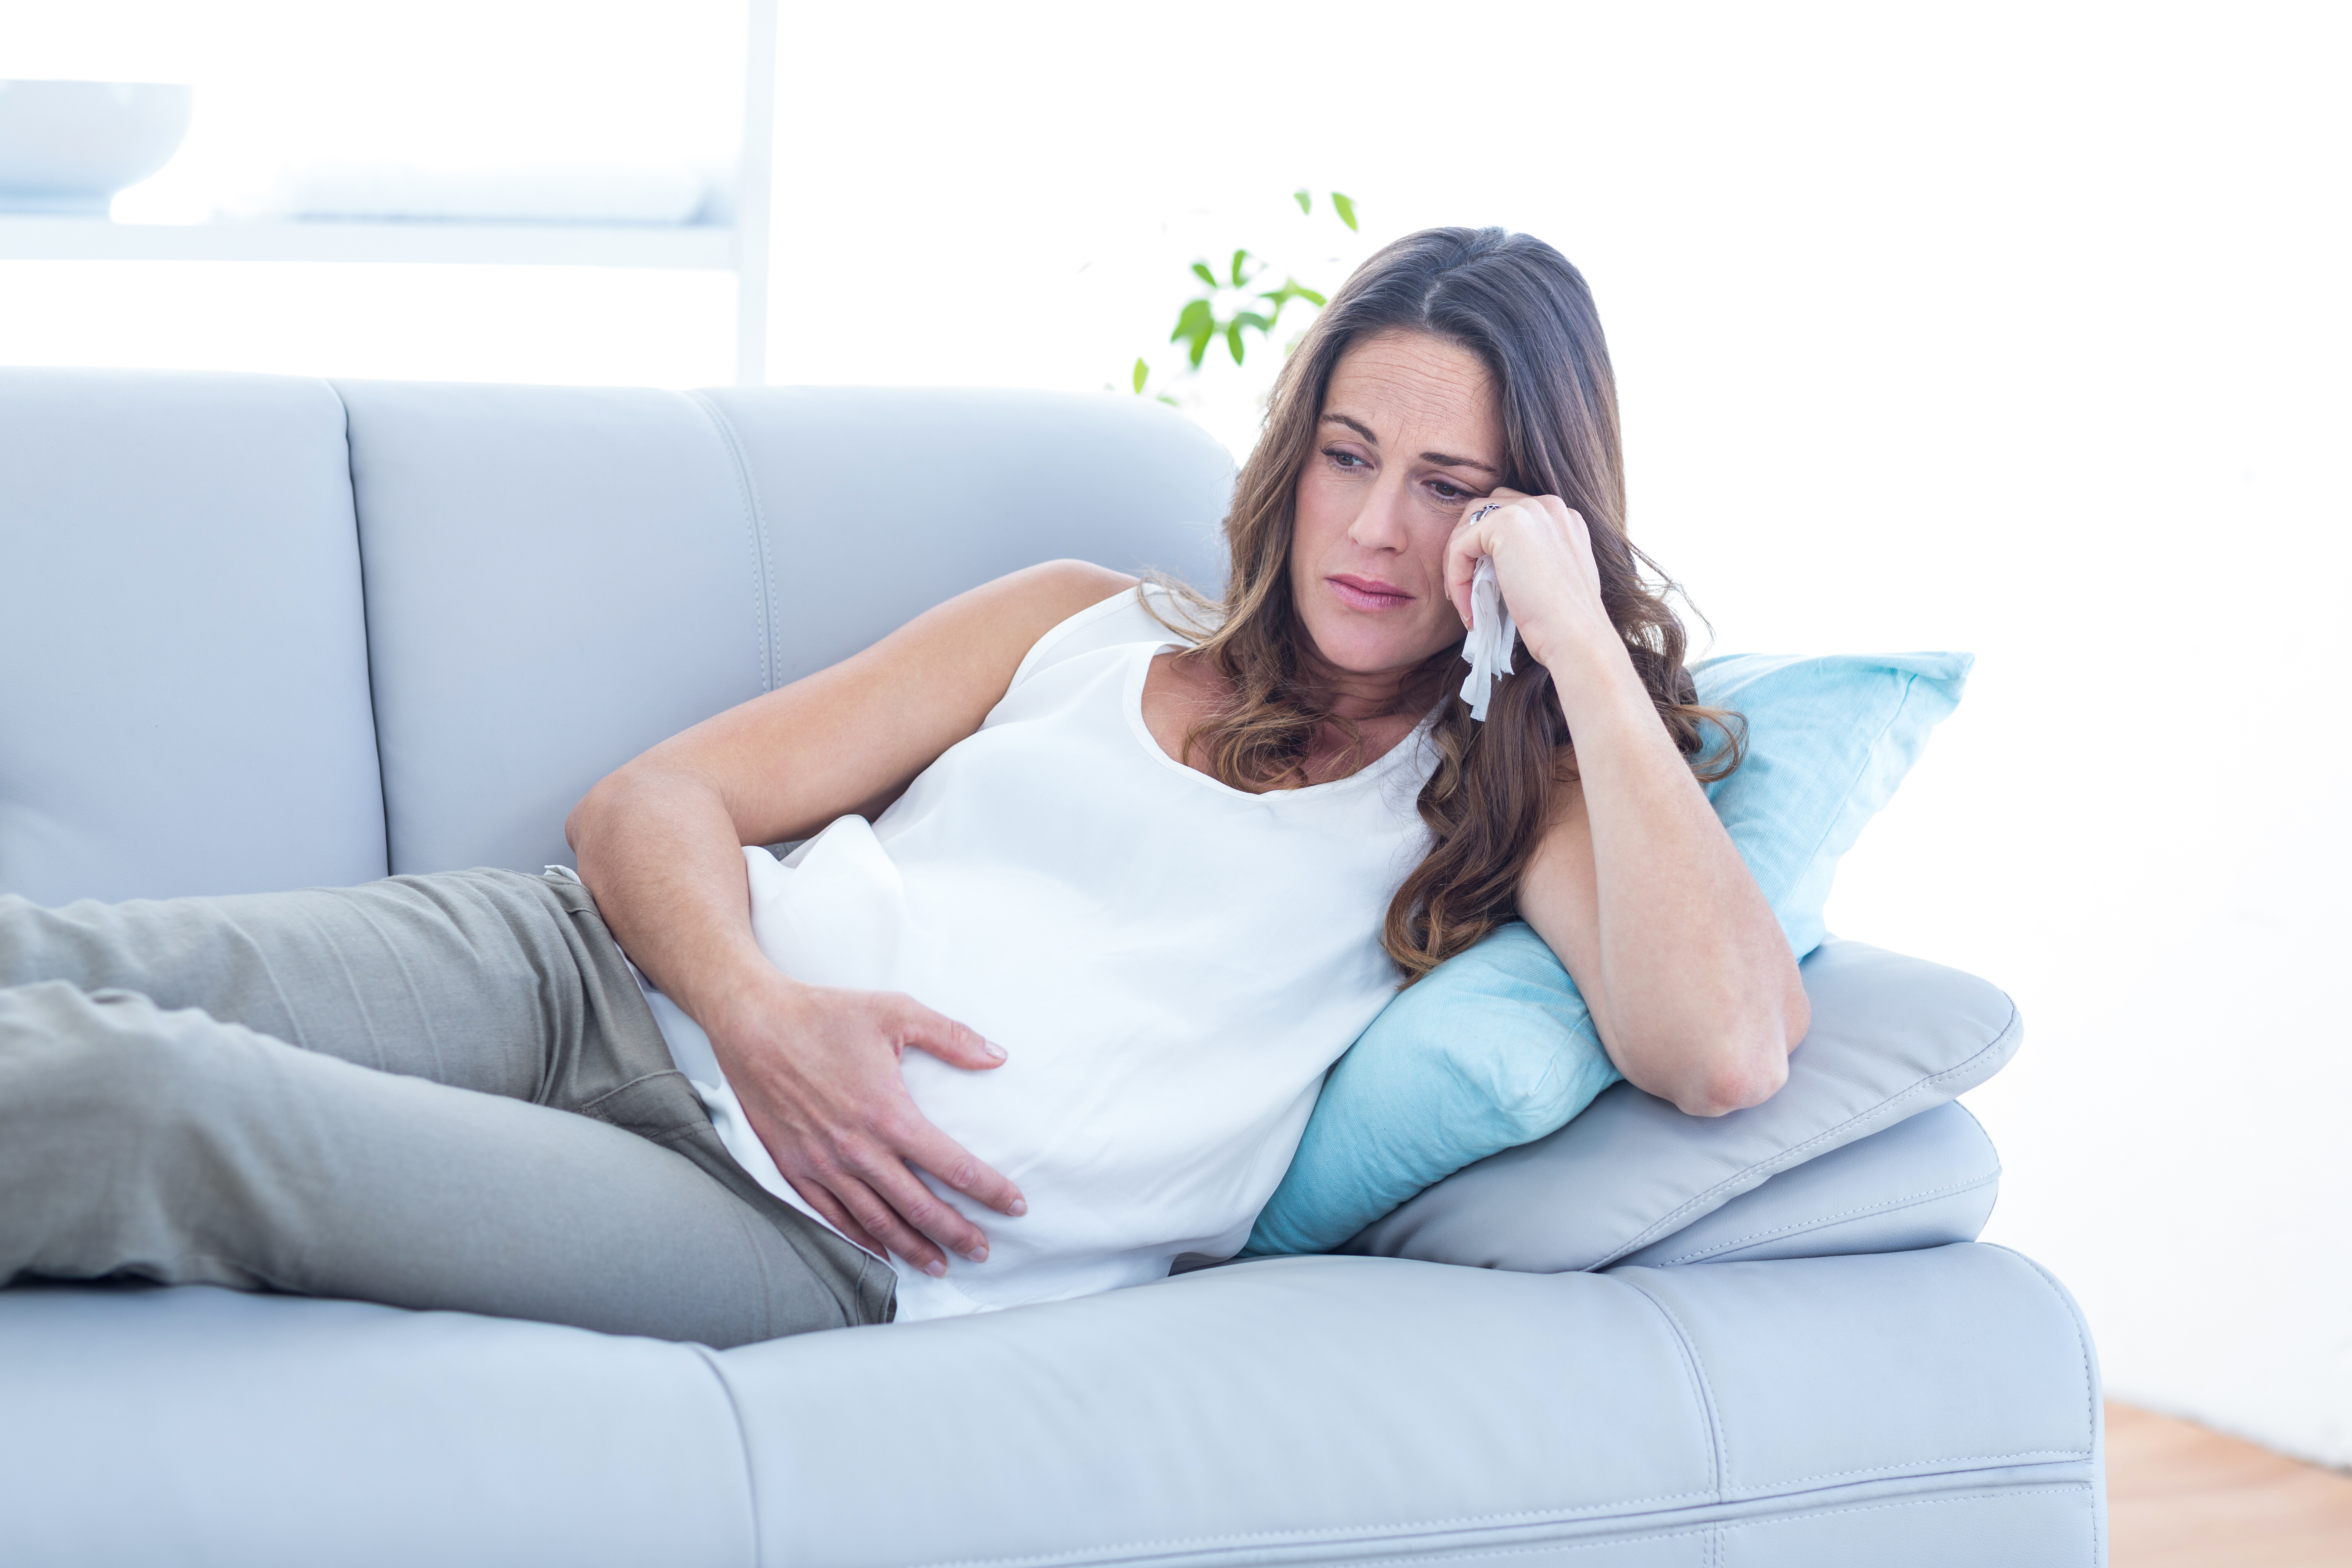 A sad pregnant woman lying on the sofa | Source: Shutterstock